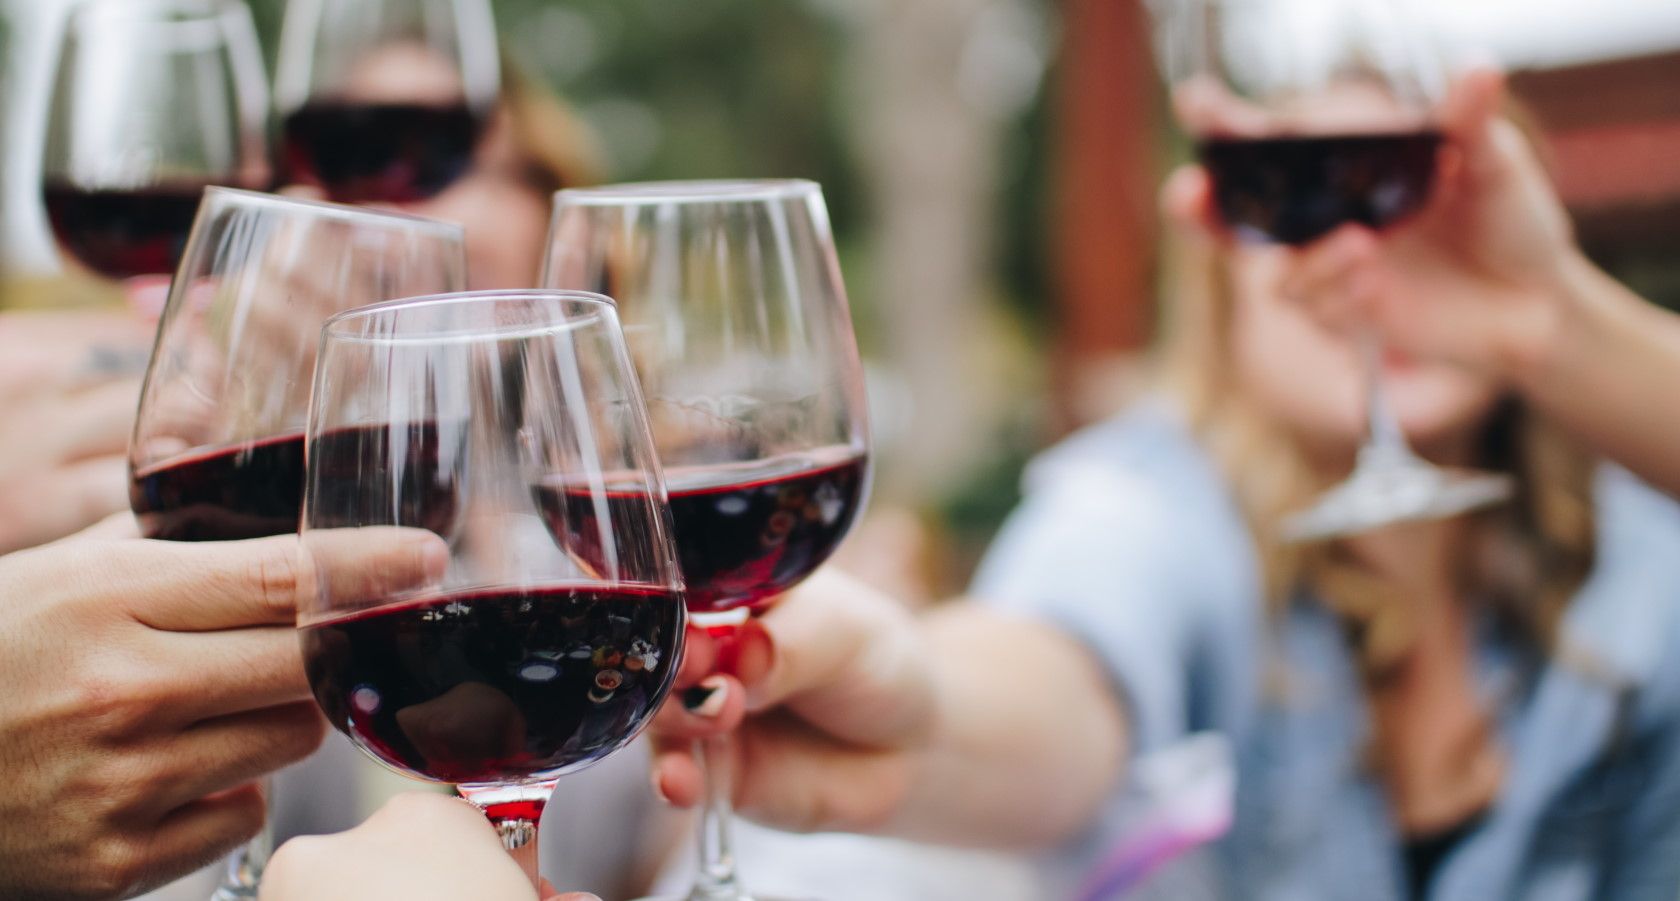 People holding wine glasses with red wine and toasting